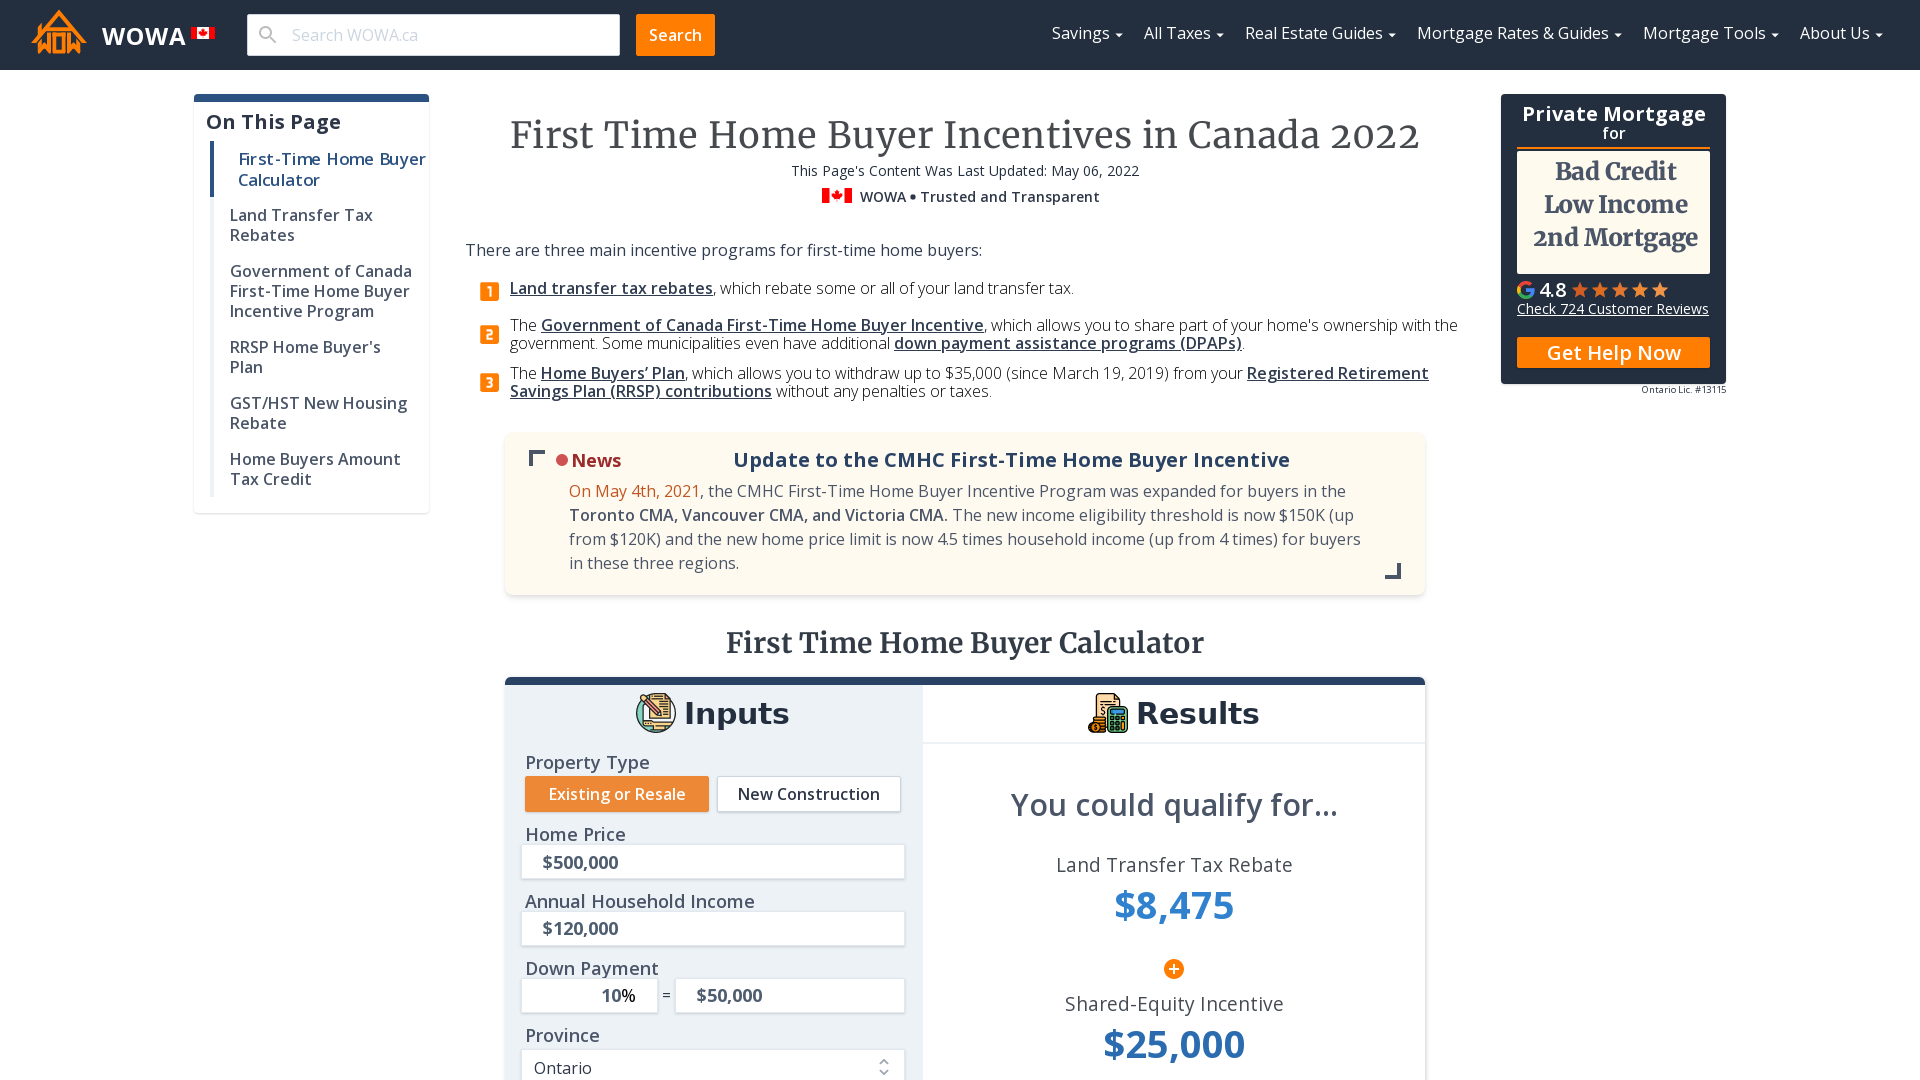 canada-first-time-home-buyers-incentives-2022-wowa-ca